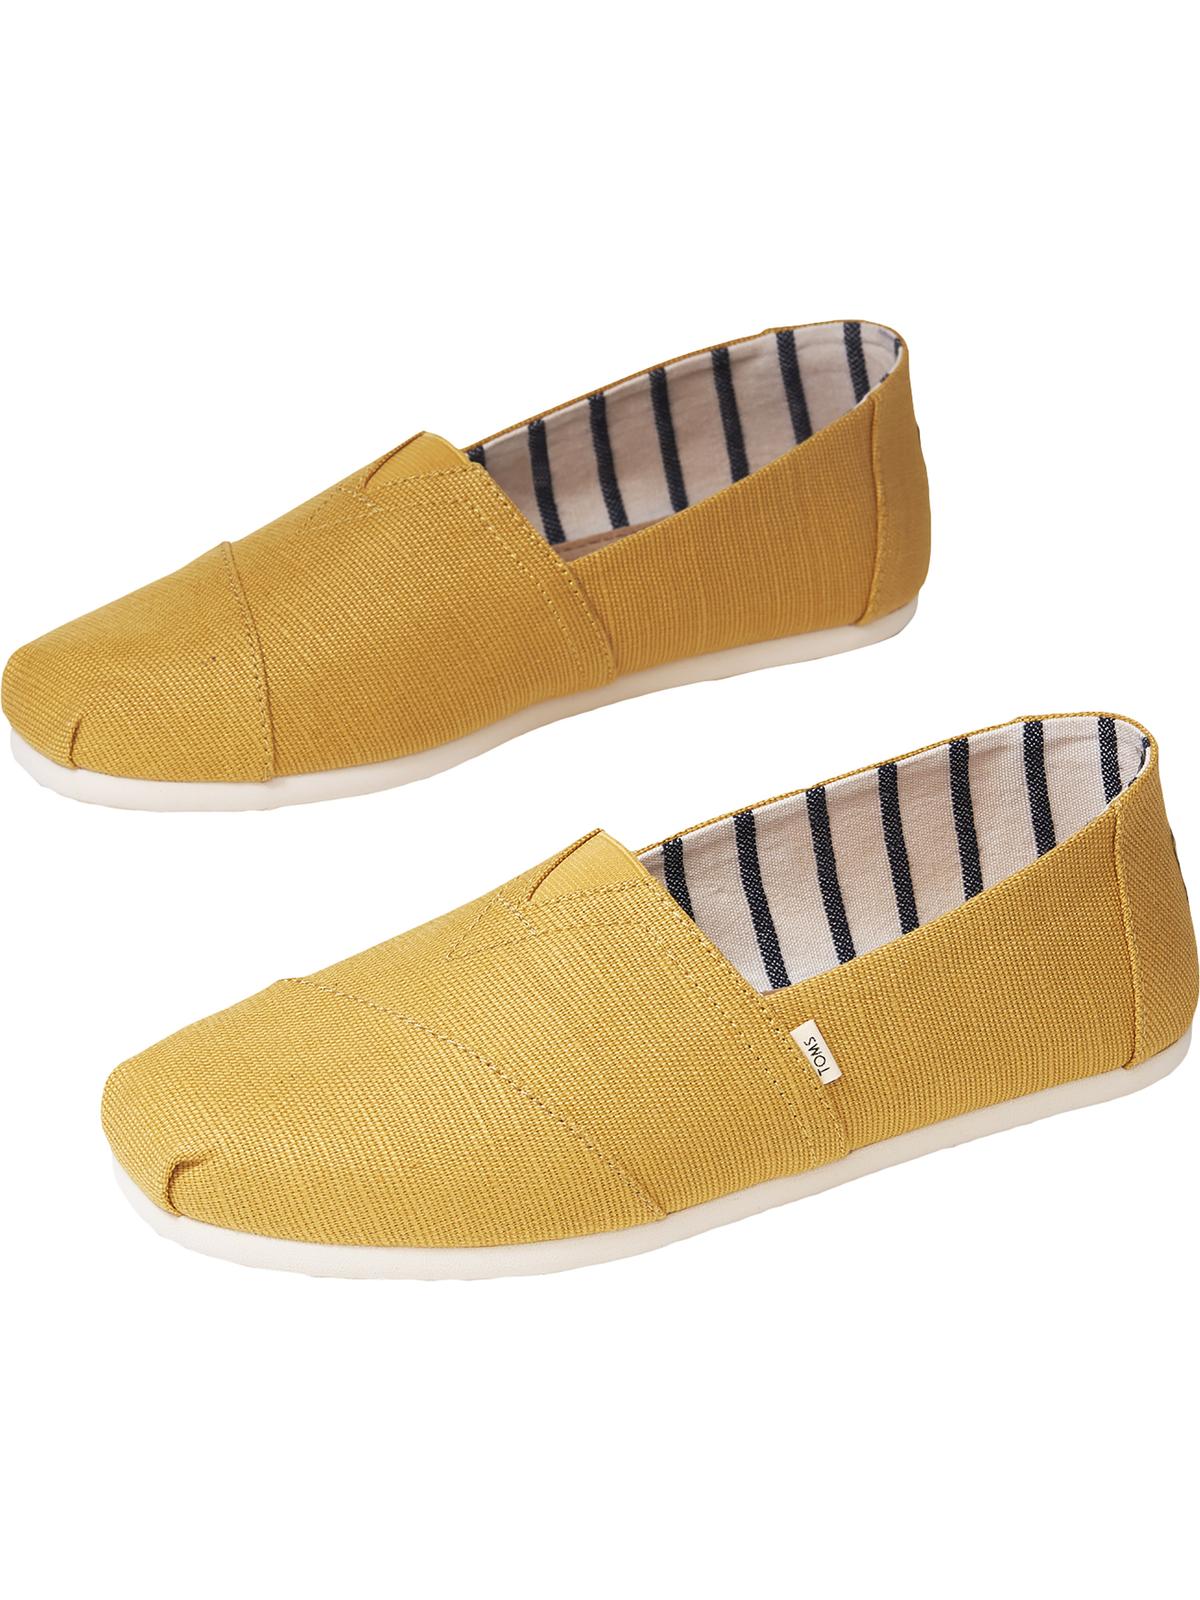 Toms Mens Classic Canvas Slip On Casual Shoes - image 2 of 3